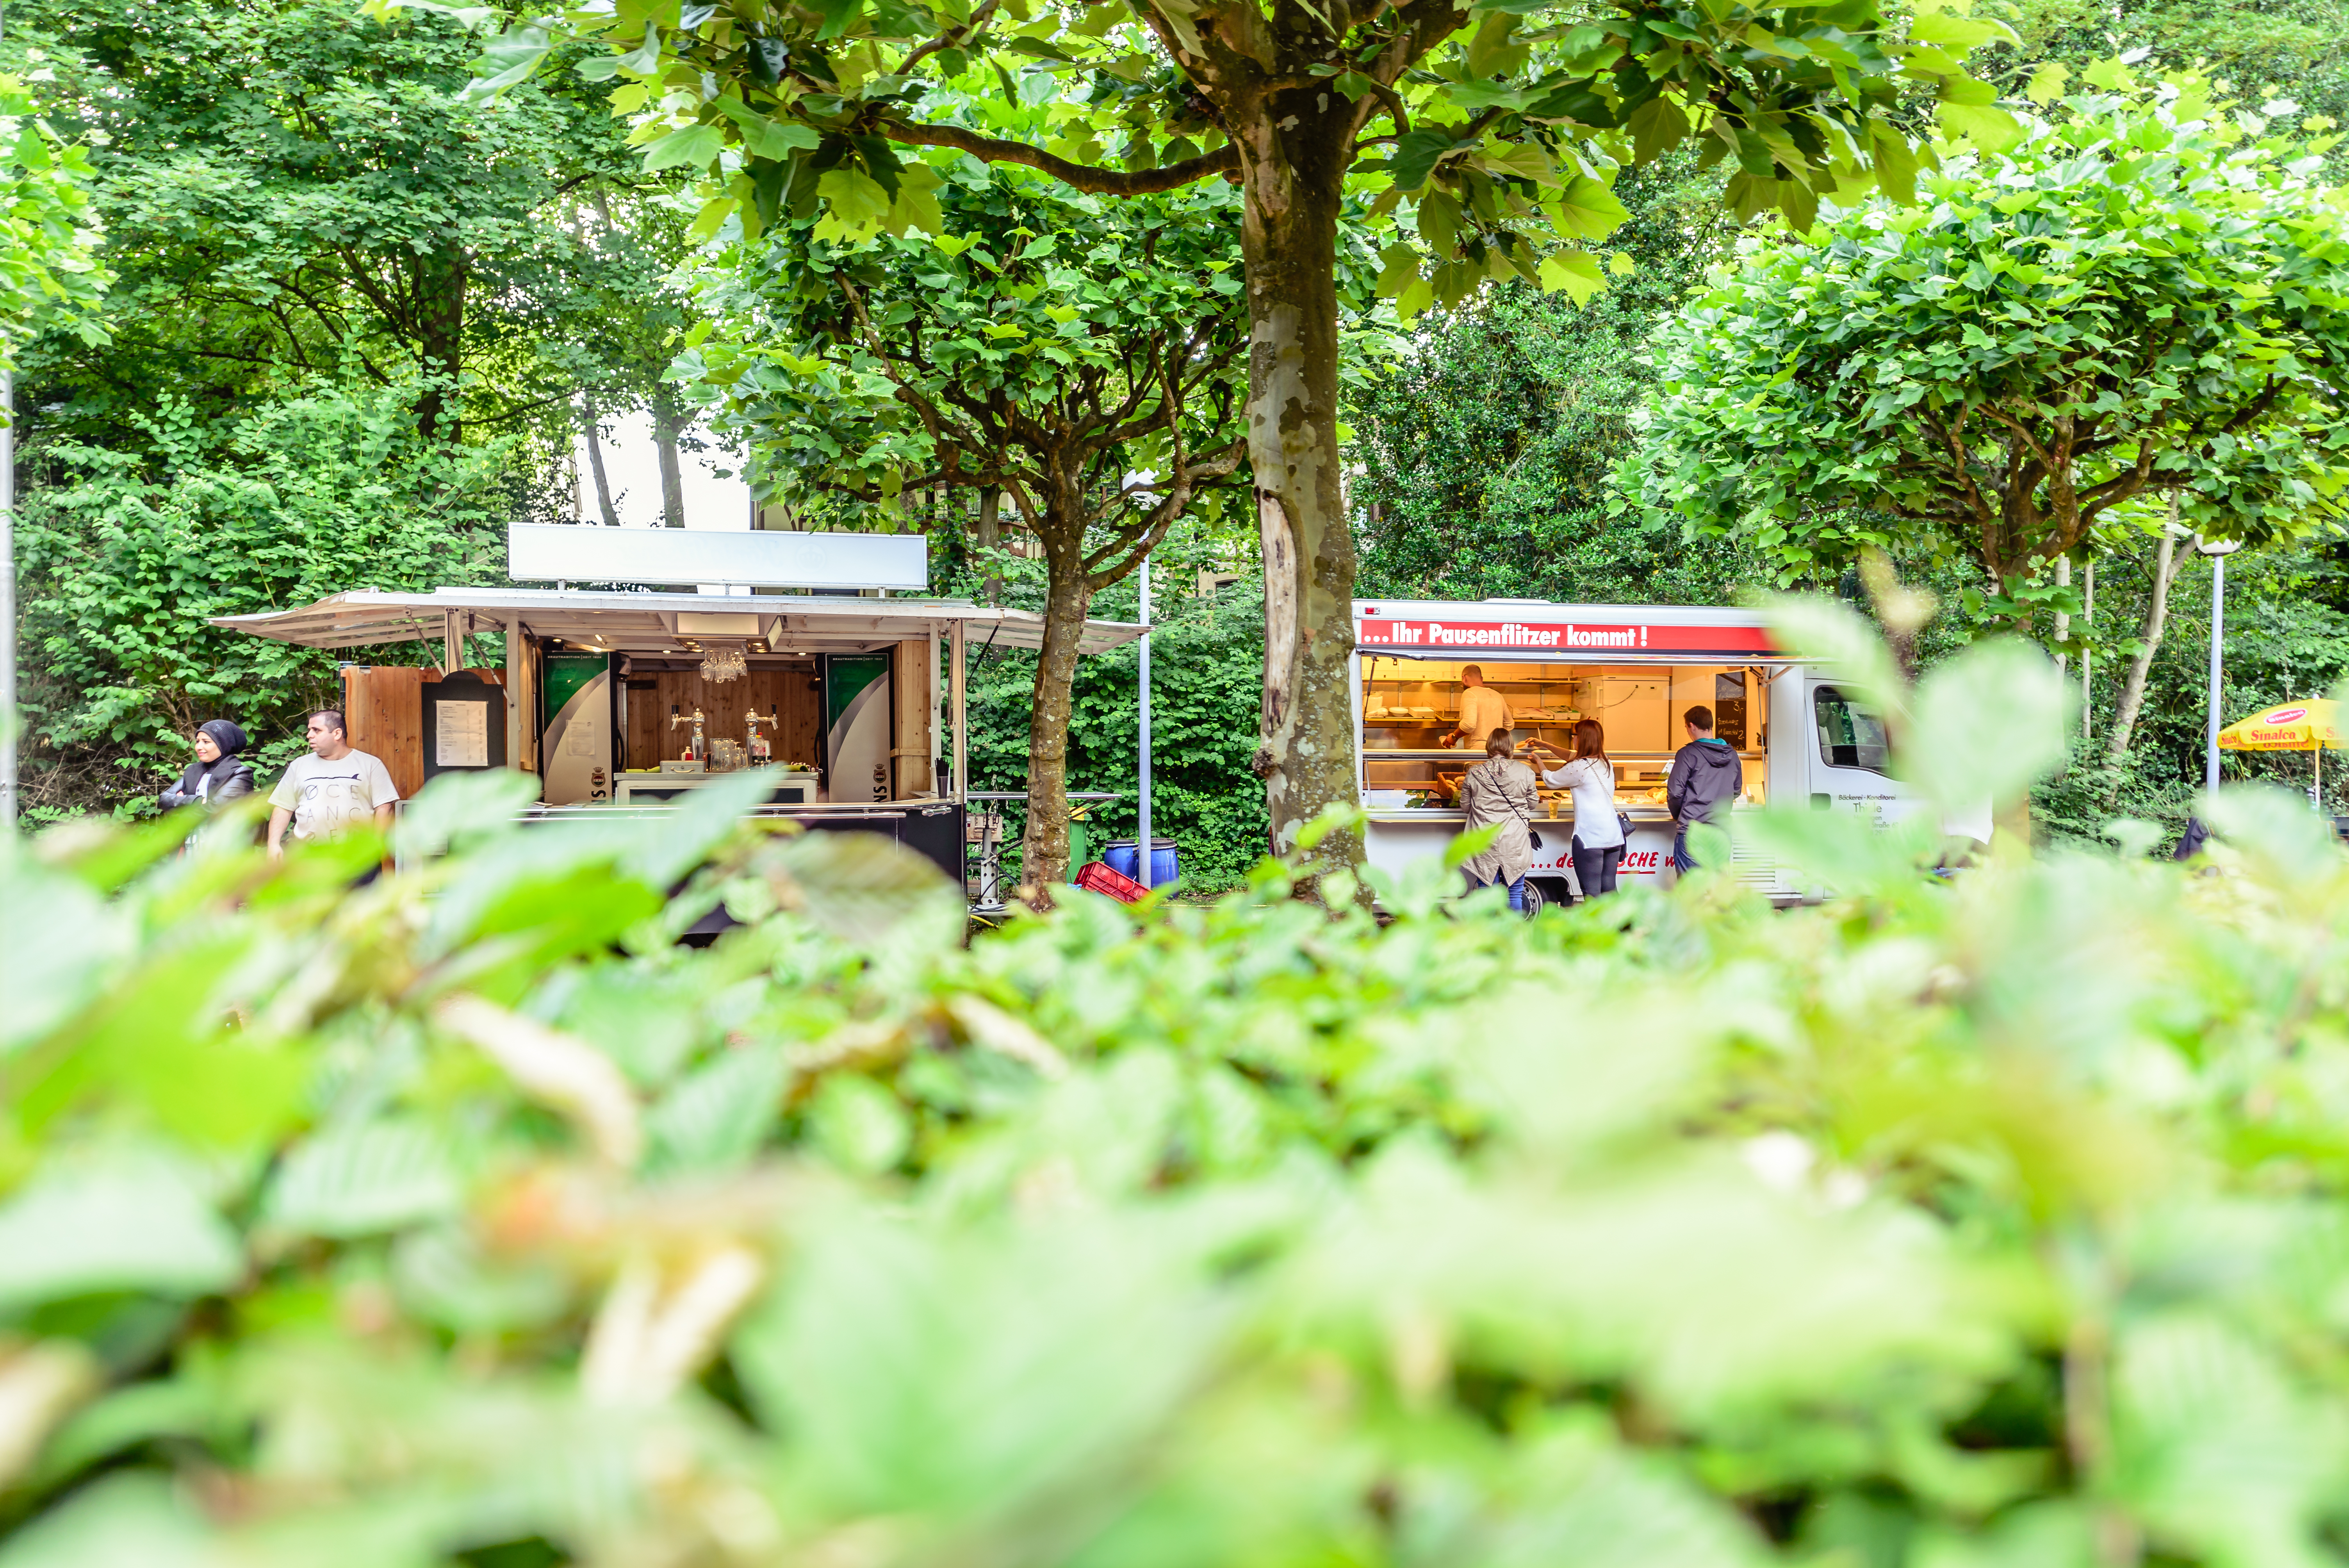 View of two food trucks in the beer garden of the Freilichtbühne Wattenscheid. Green bushes in the foreground.